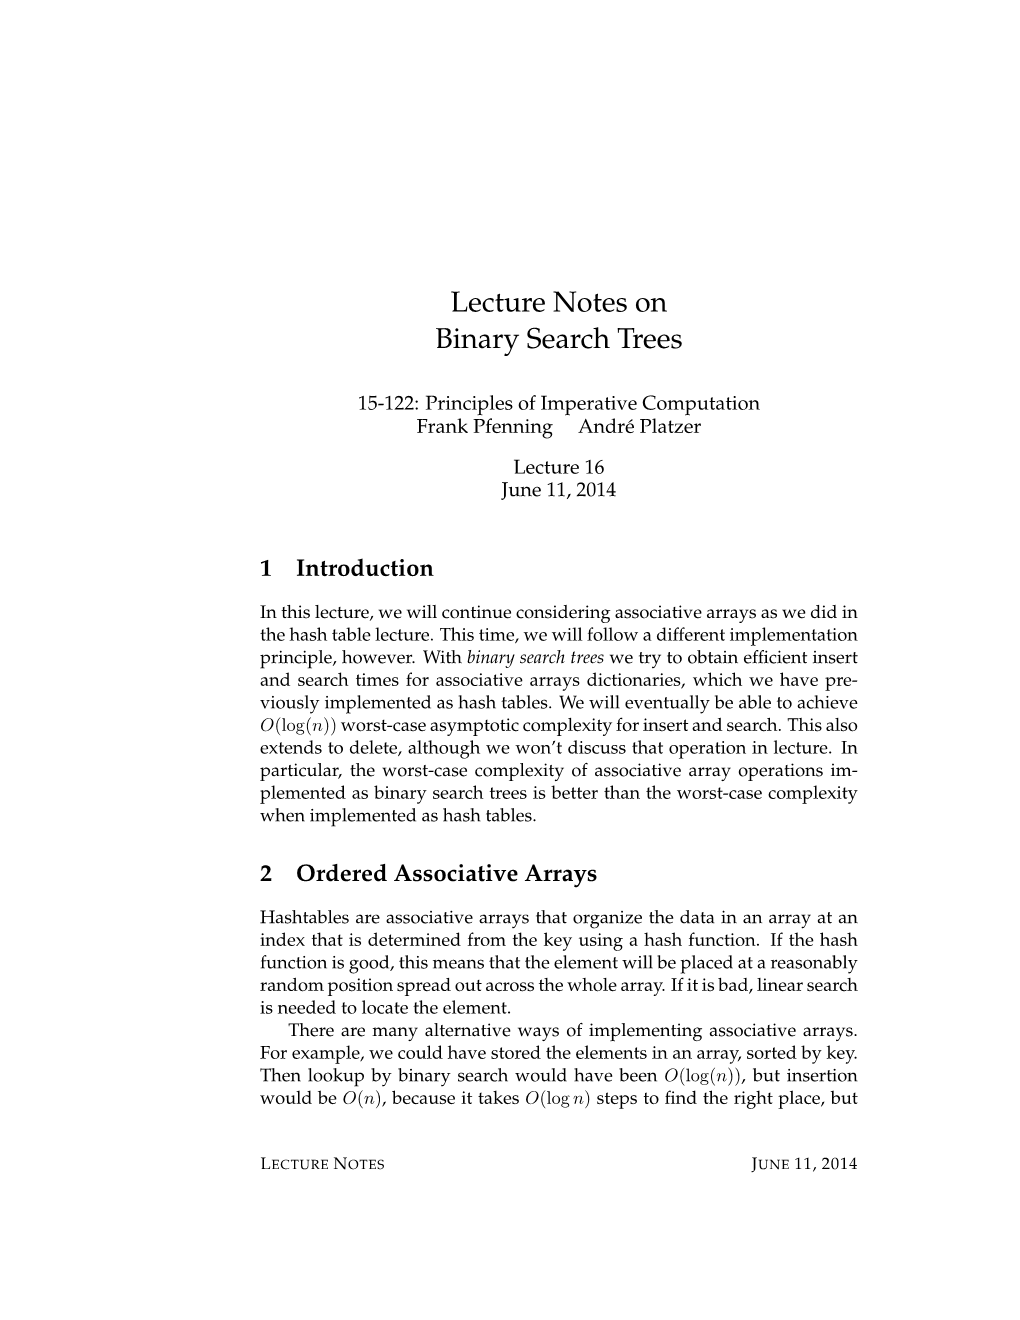 Lecture Notes on Binary Search Trees